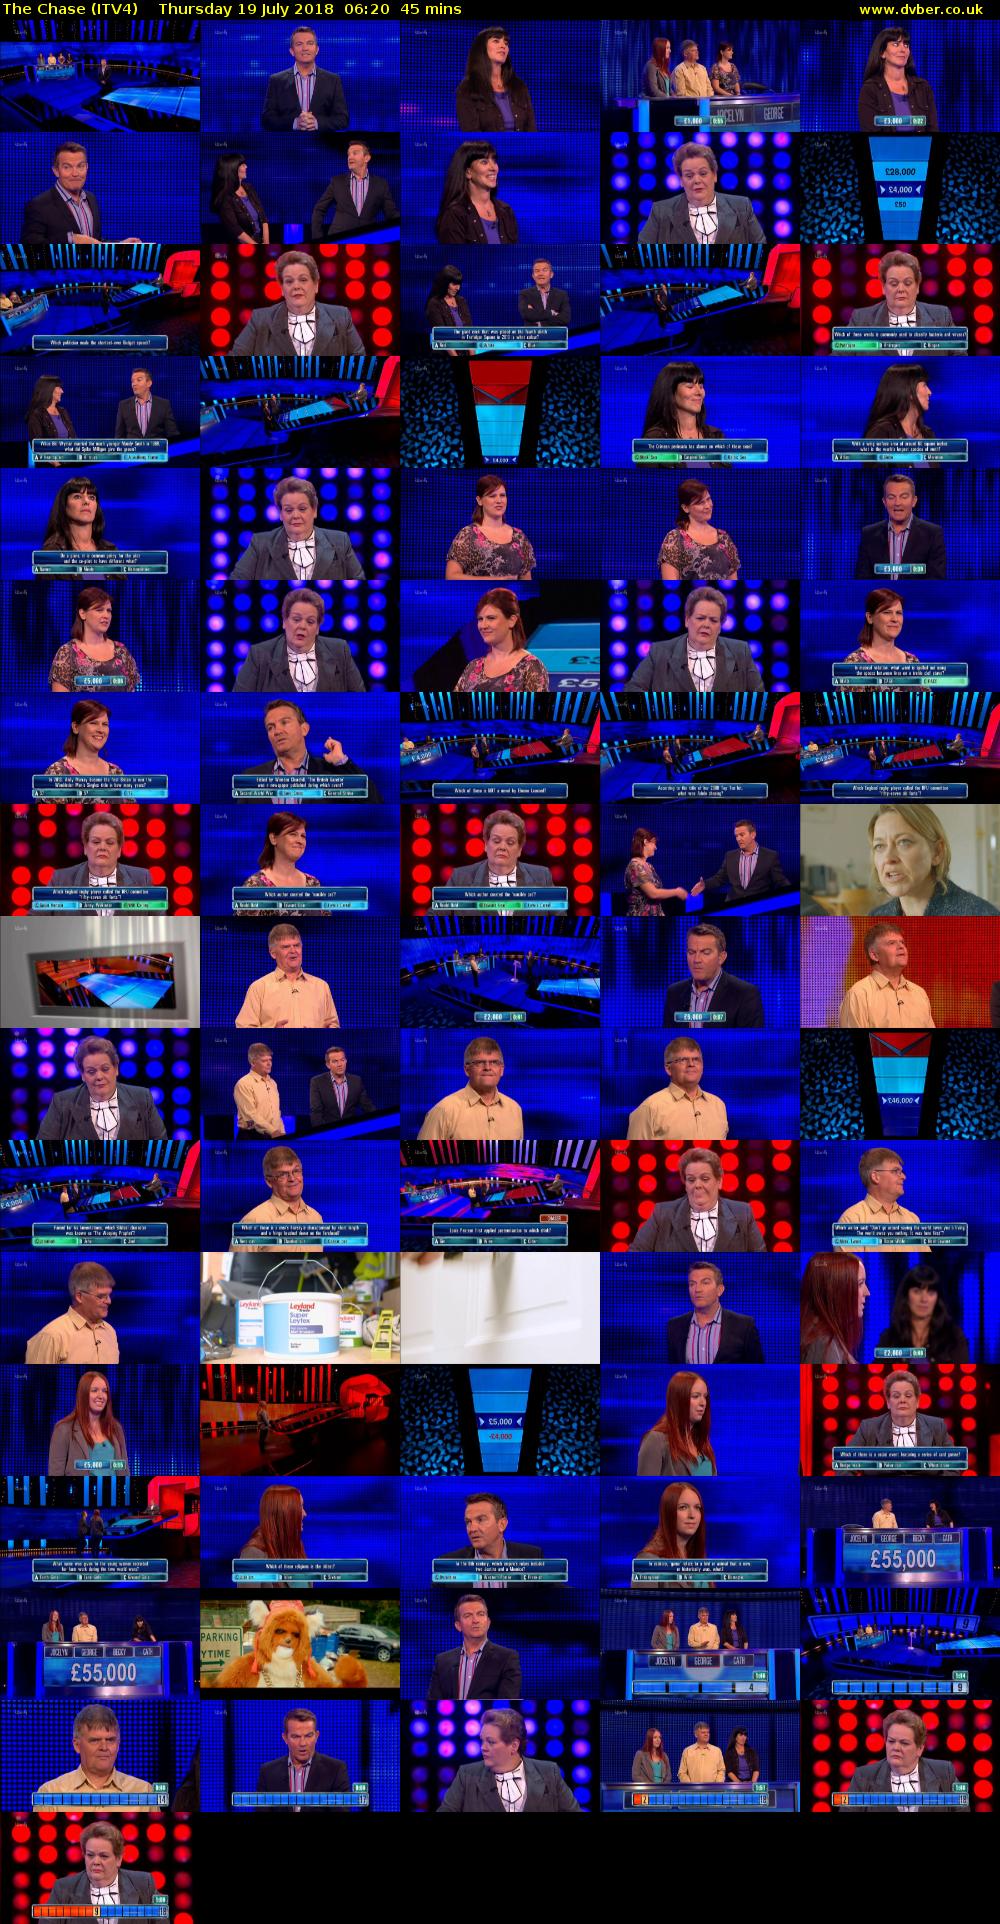 The Chase (ITV4) Thursday 19 July 2018 06:20 - 07:05